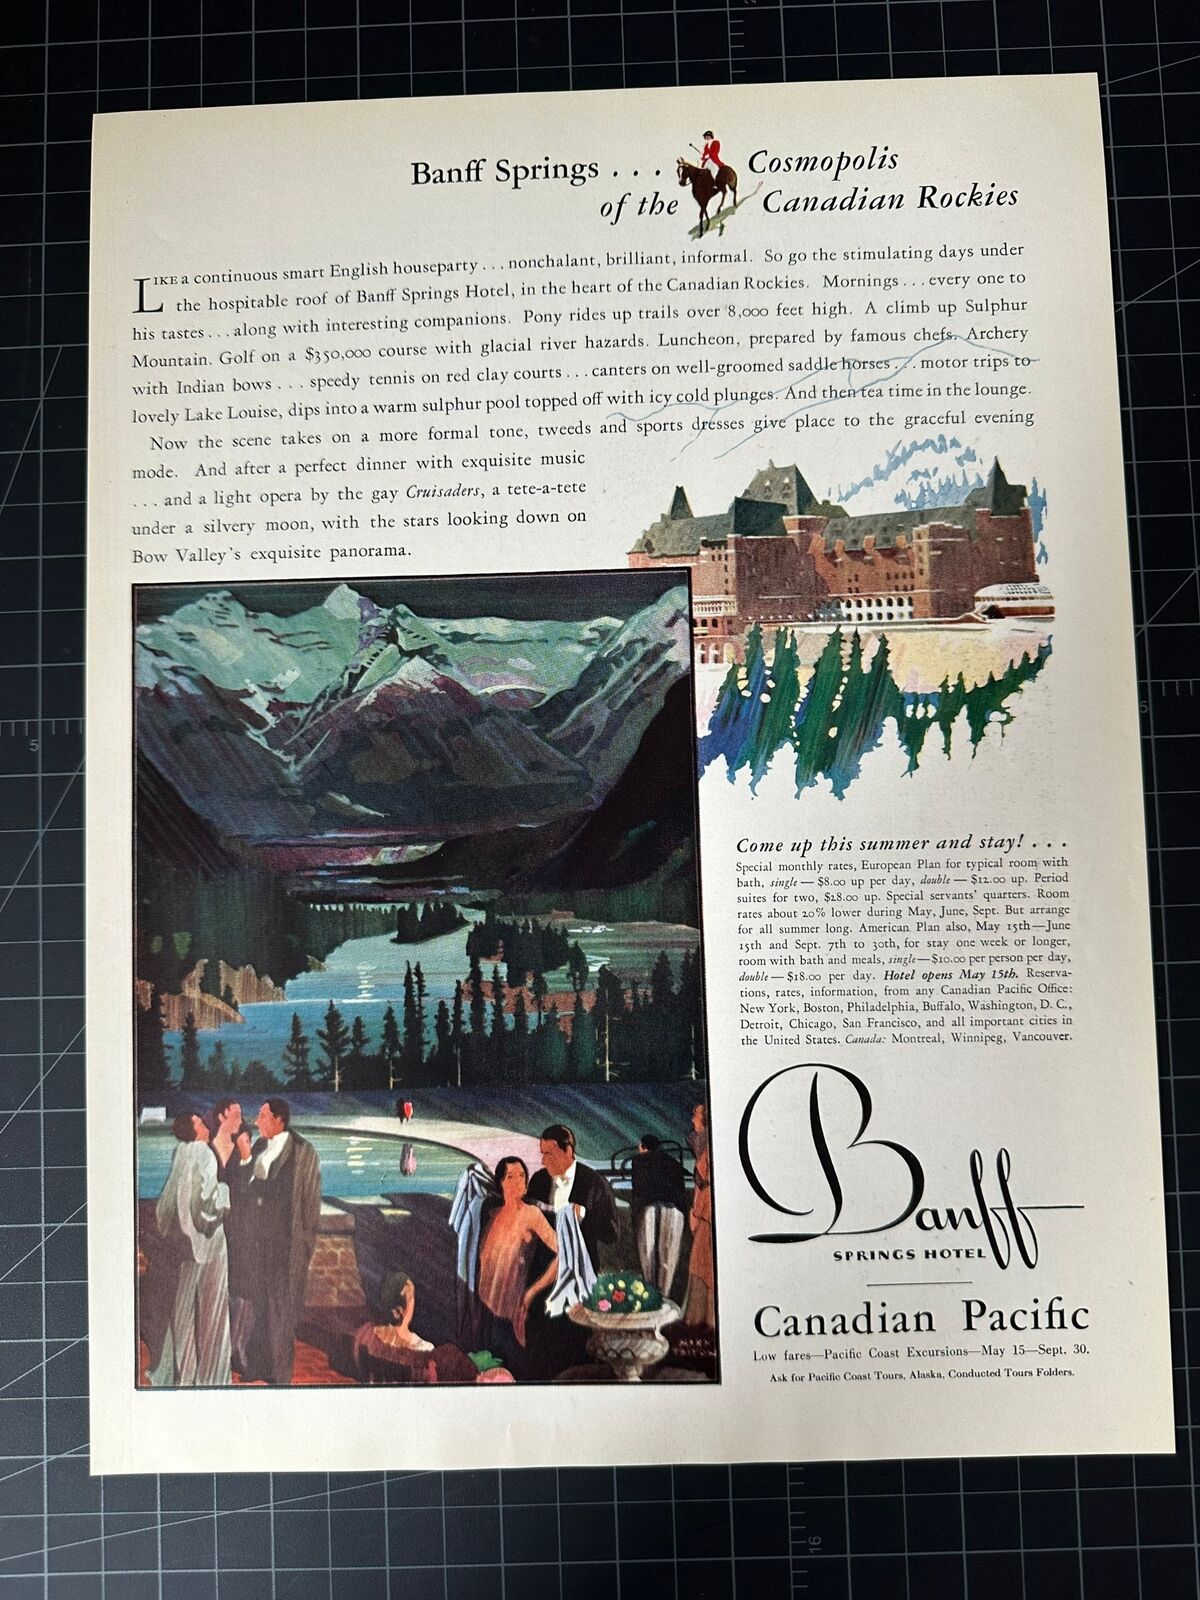 Vintage 1930s Canadian Pacific Railway - Banff Springs Hotel Print Ad